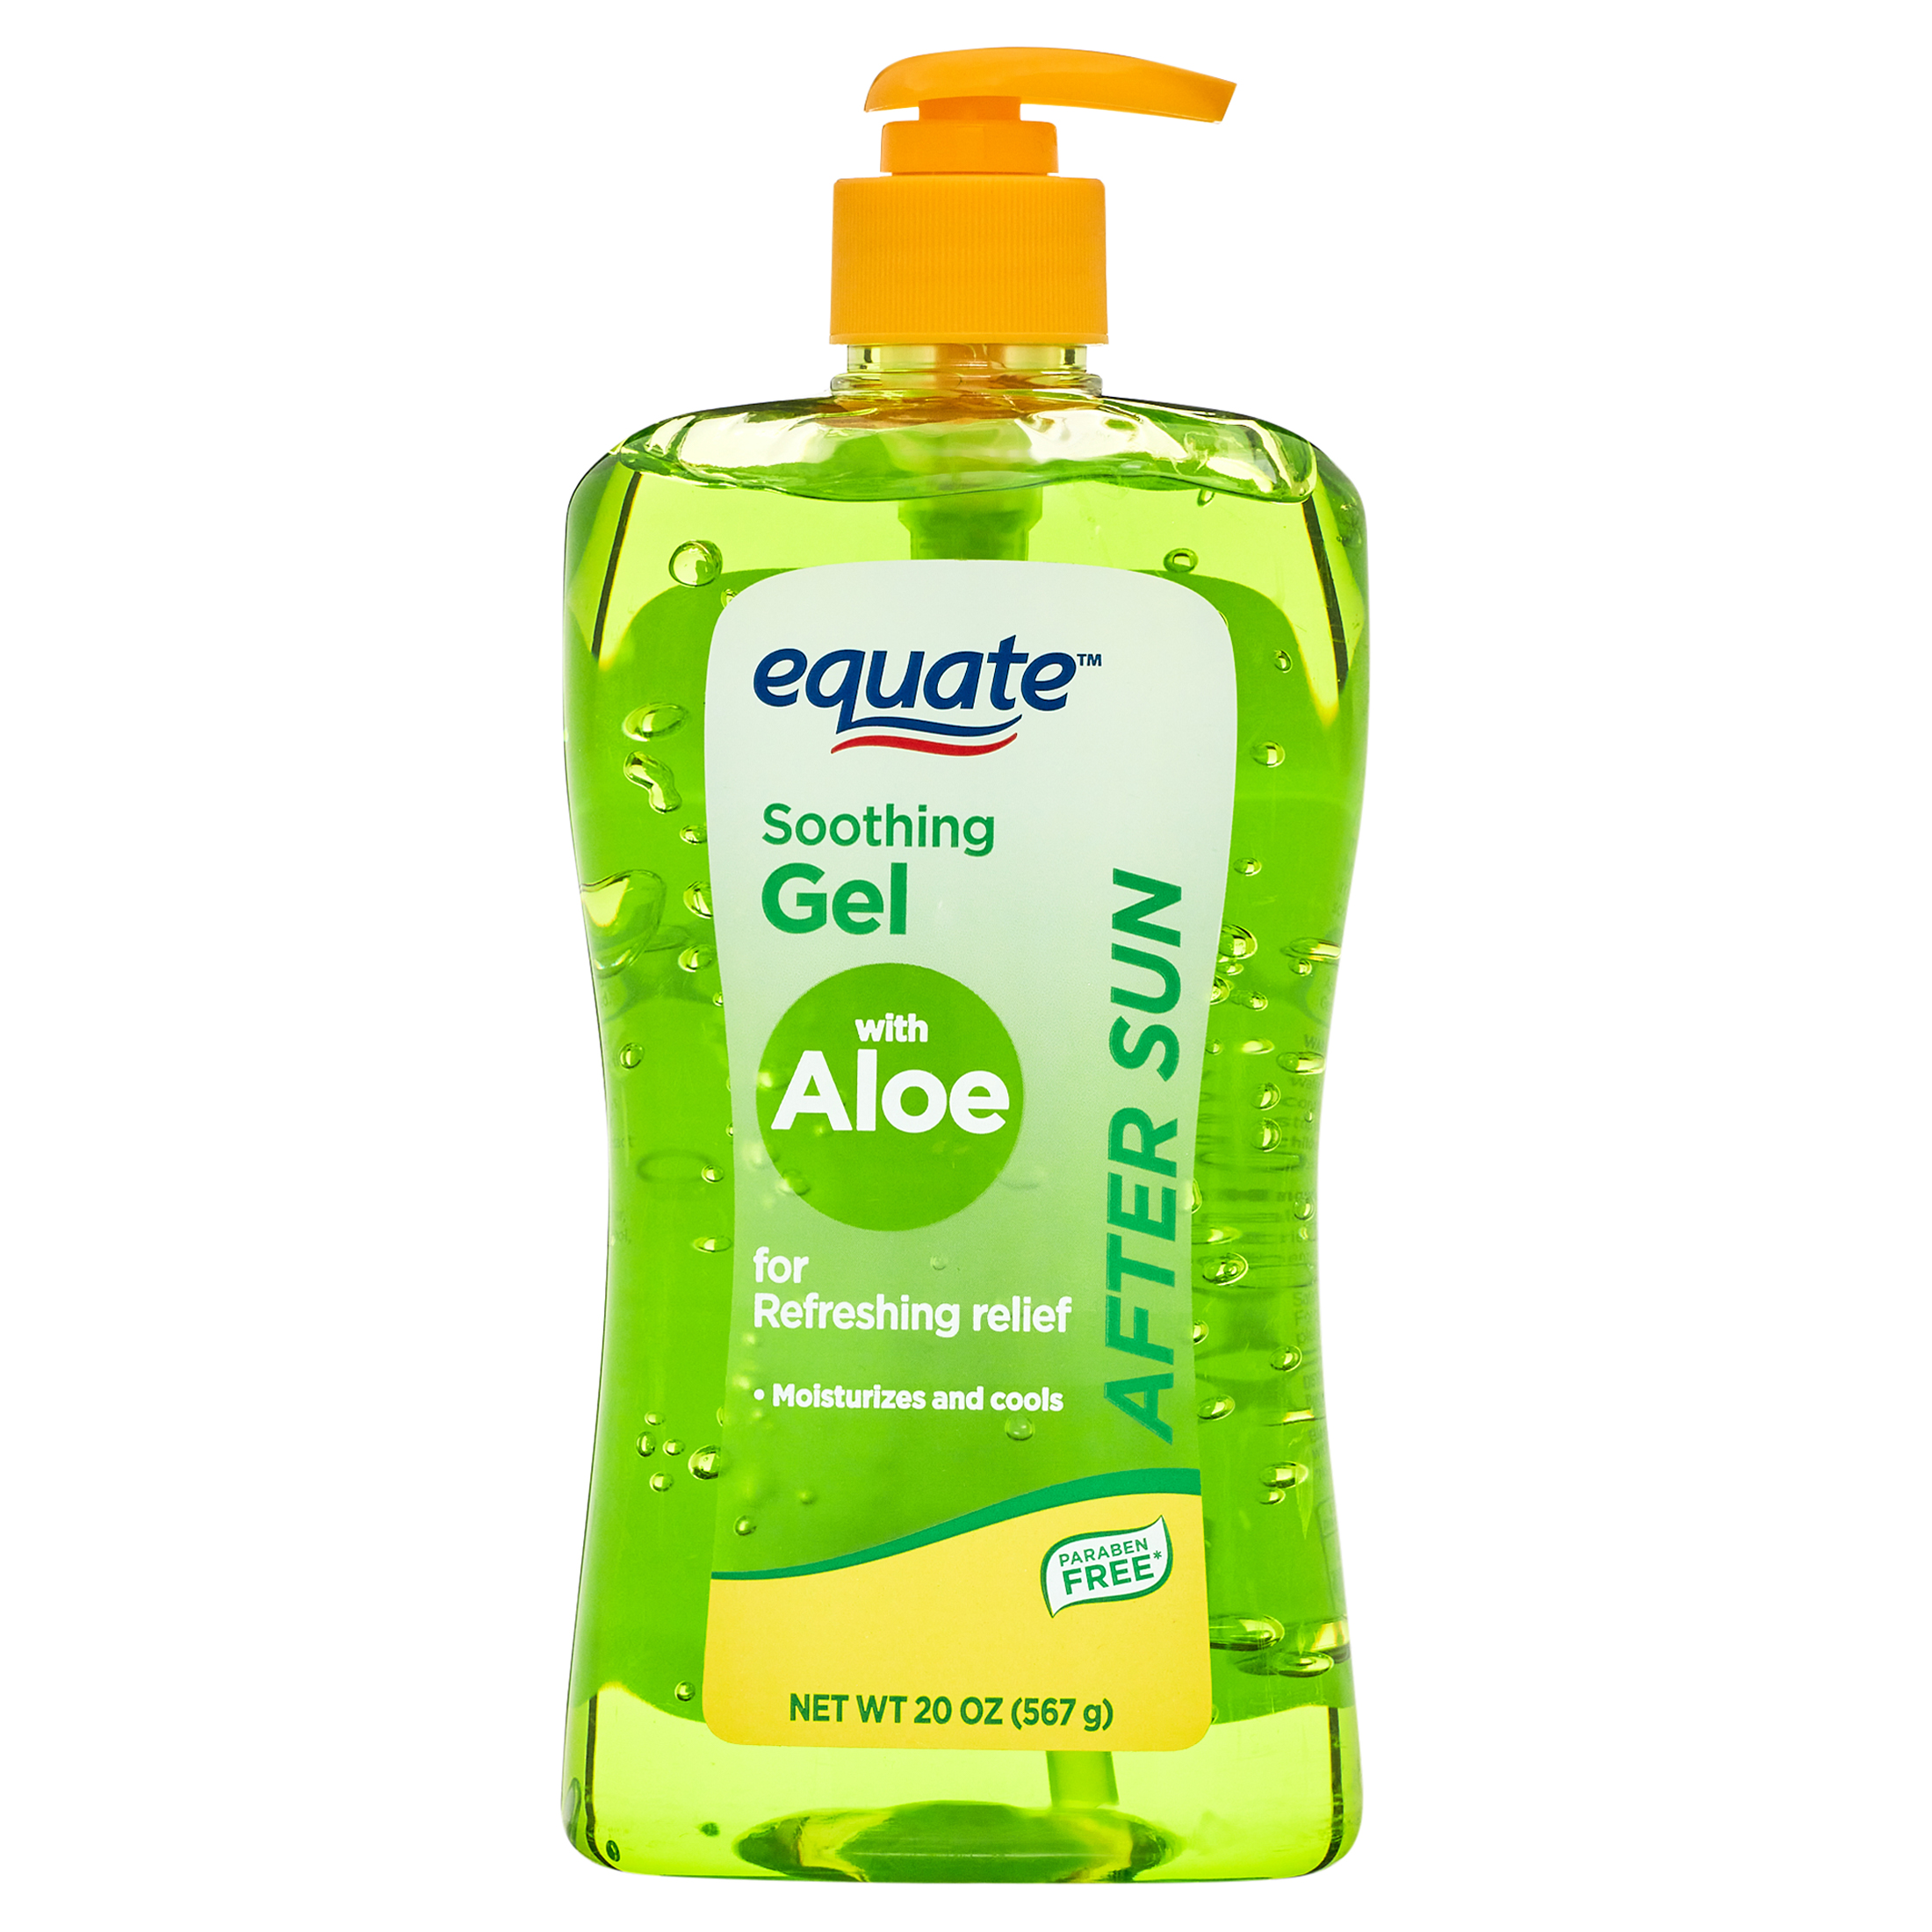 Equate After Sun Soothing Gel with Aloe, 20 oz - image 1 of 7